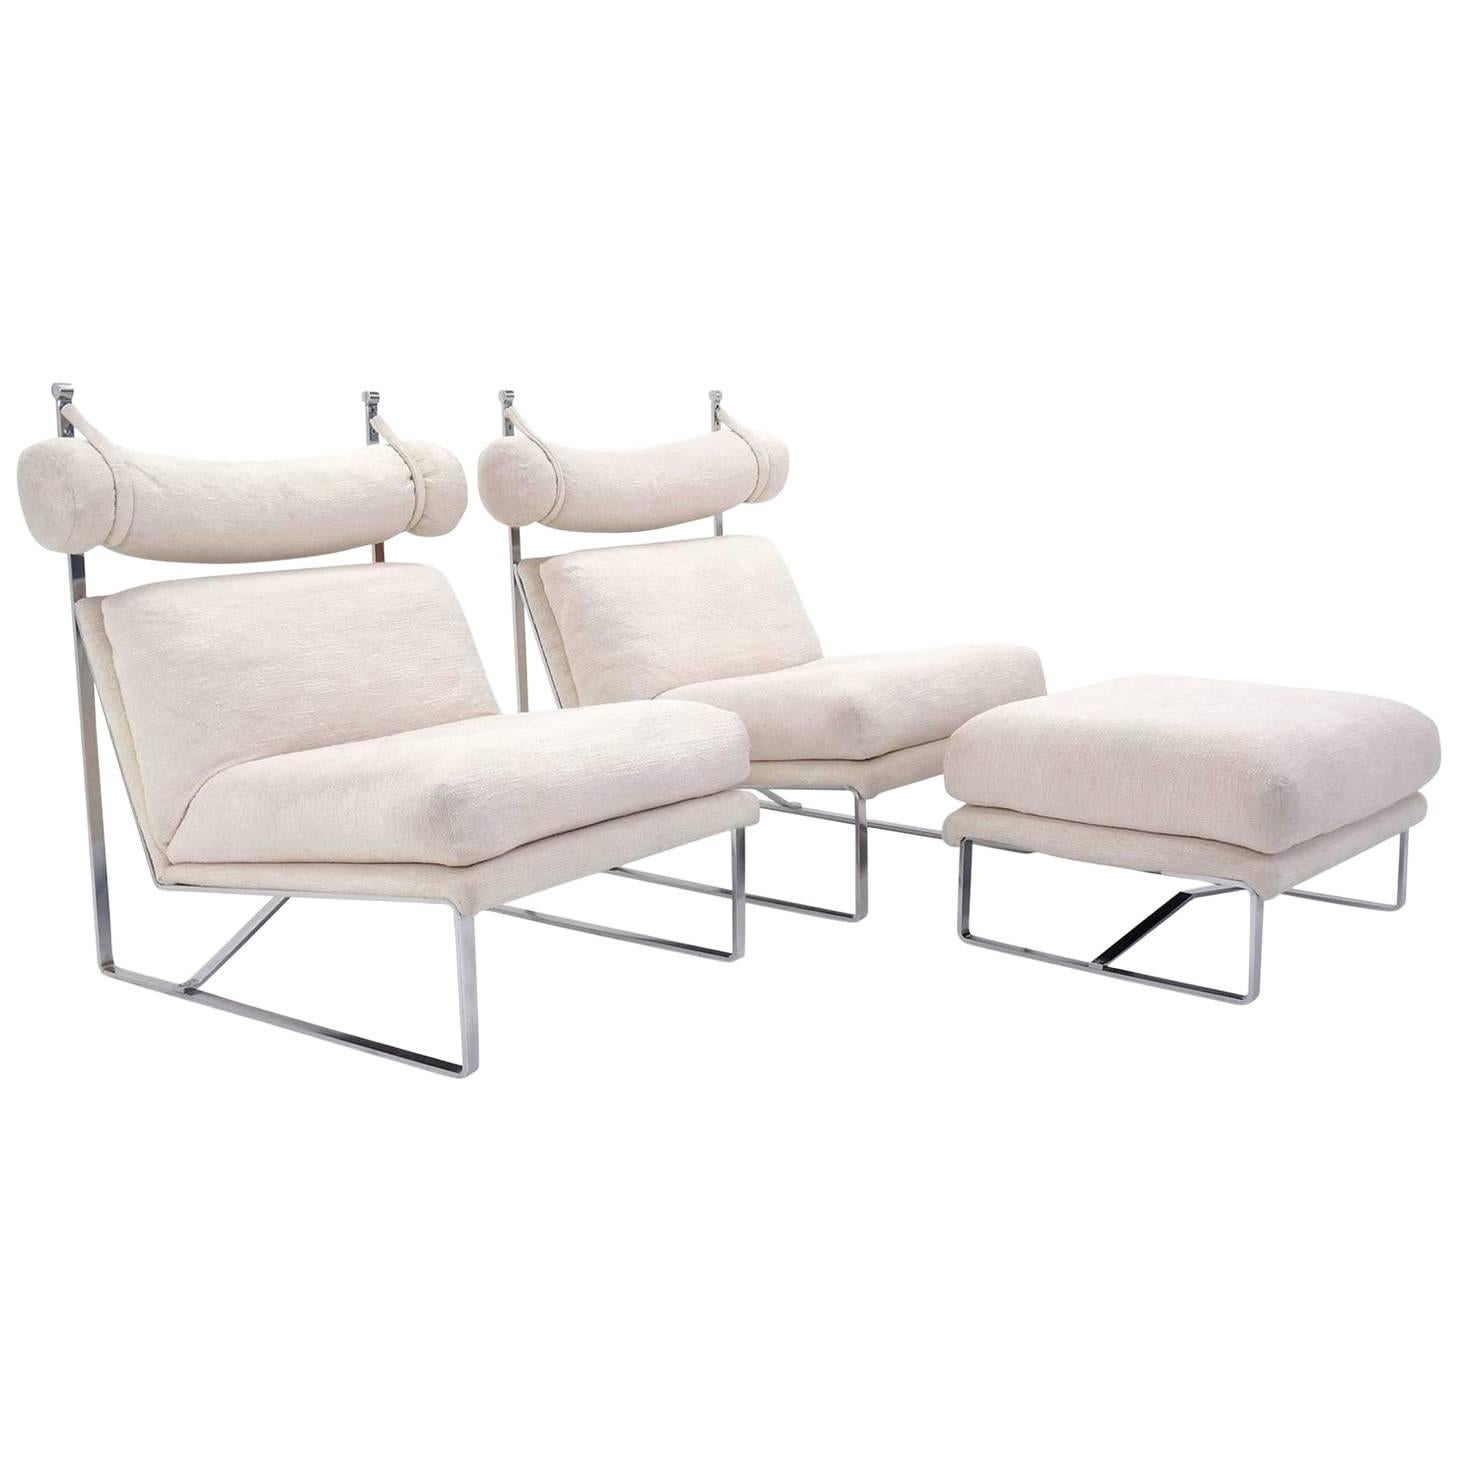 Unusual Suite of Luxurious Mid-Century Modern Club Chairs with Matching Ottoman